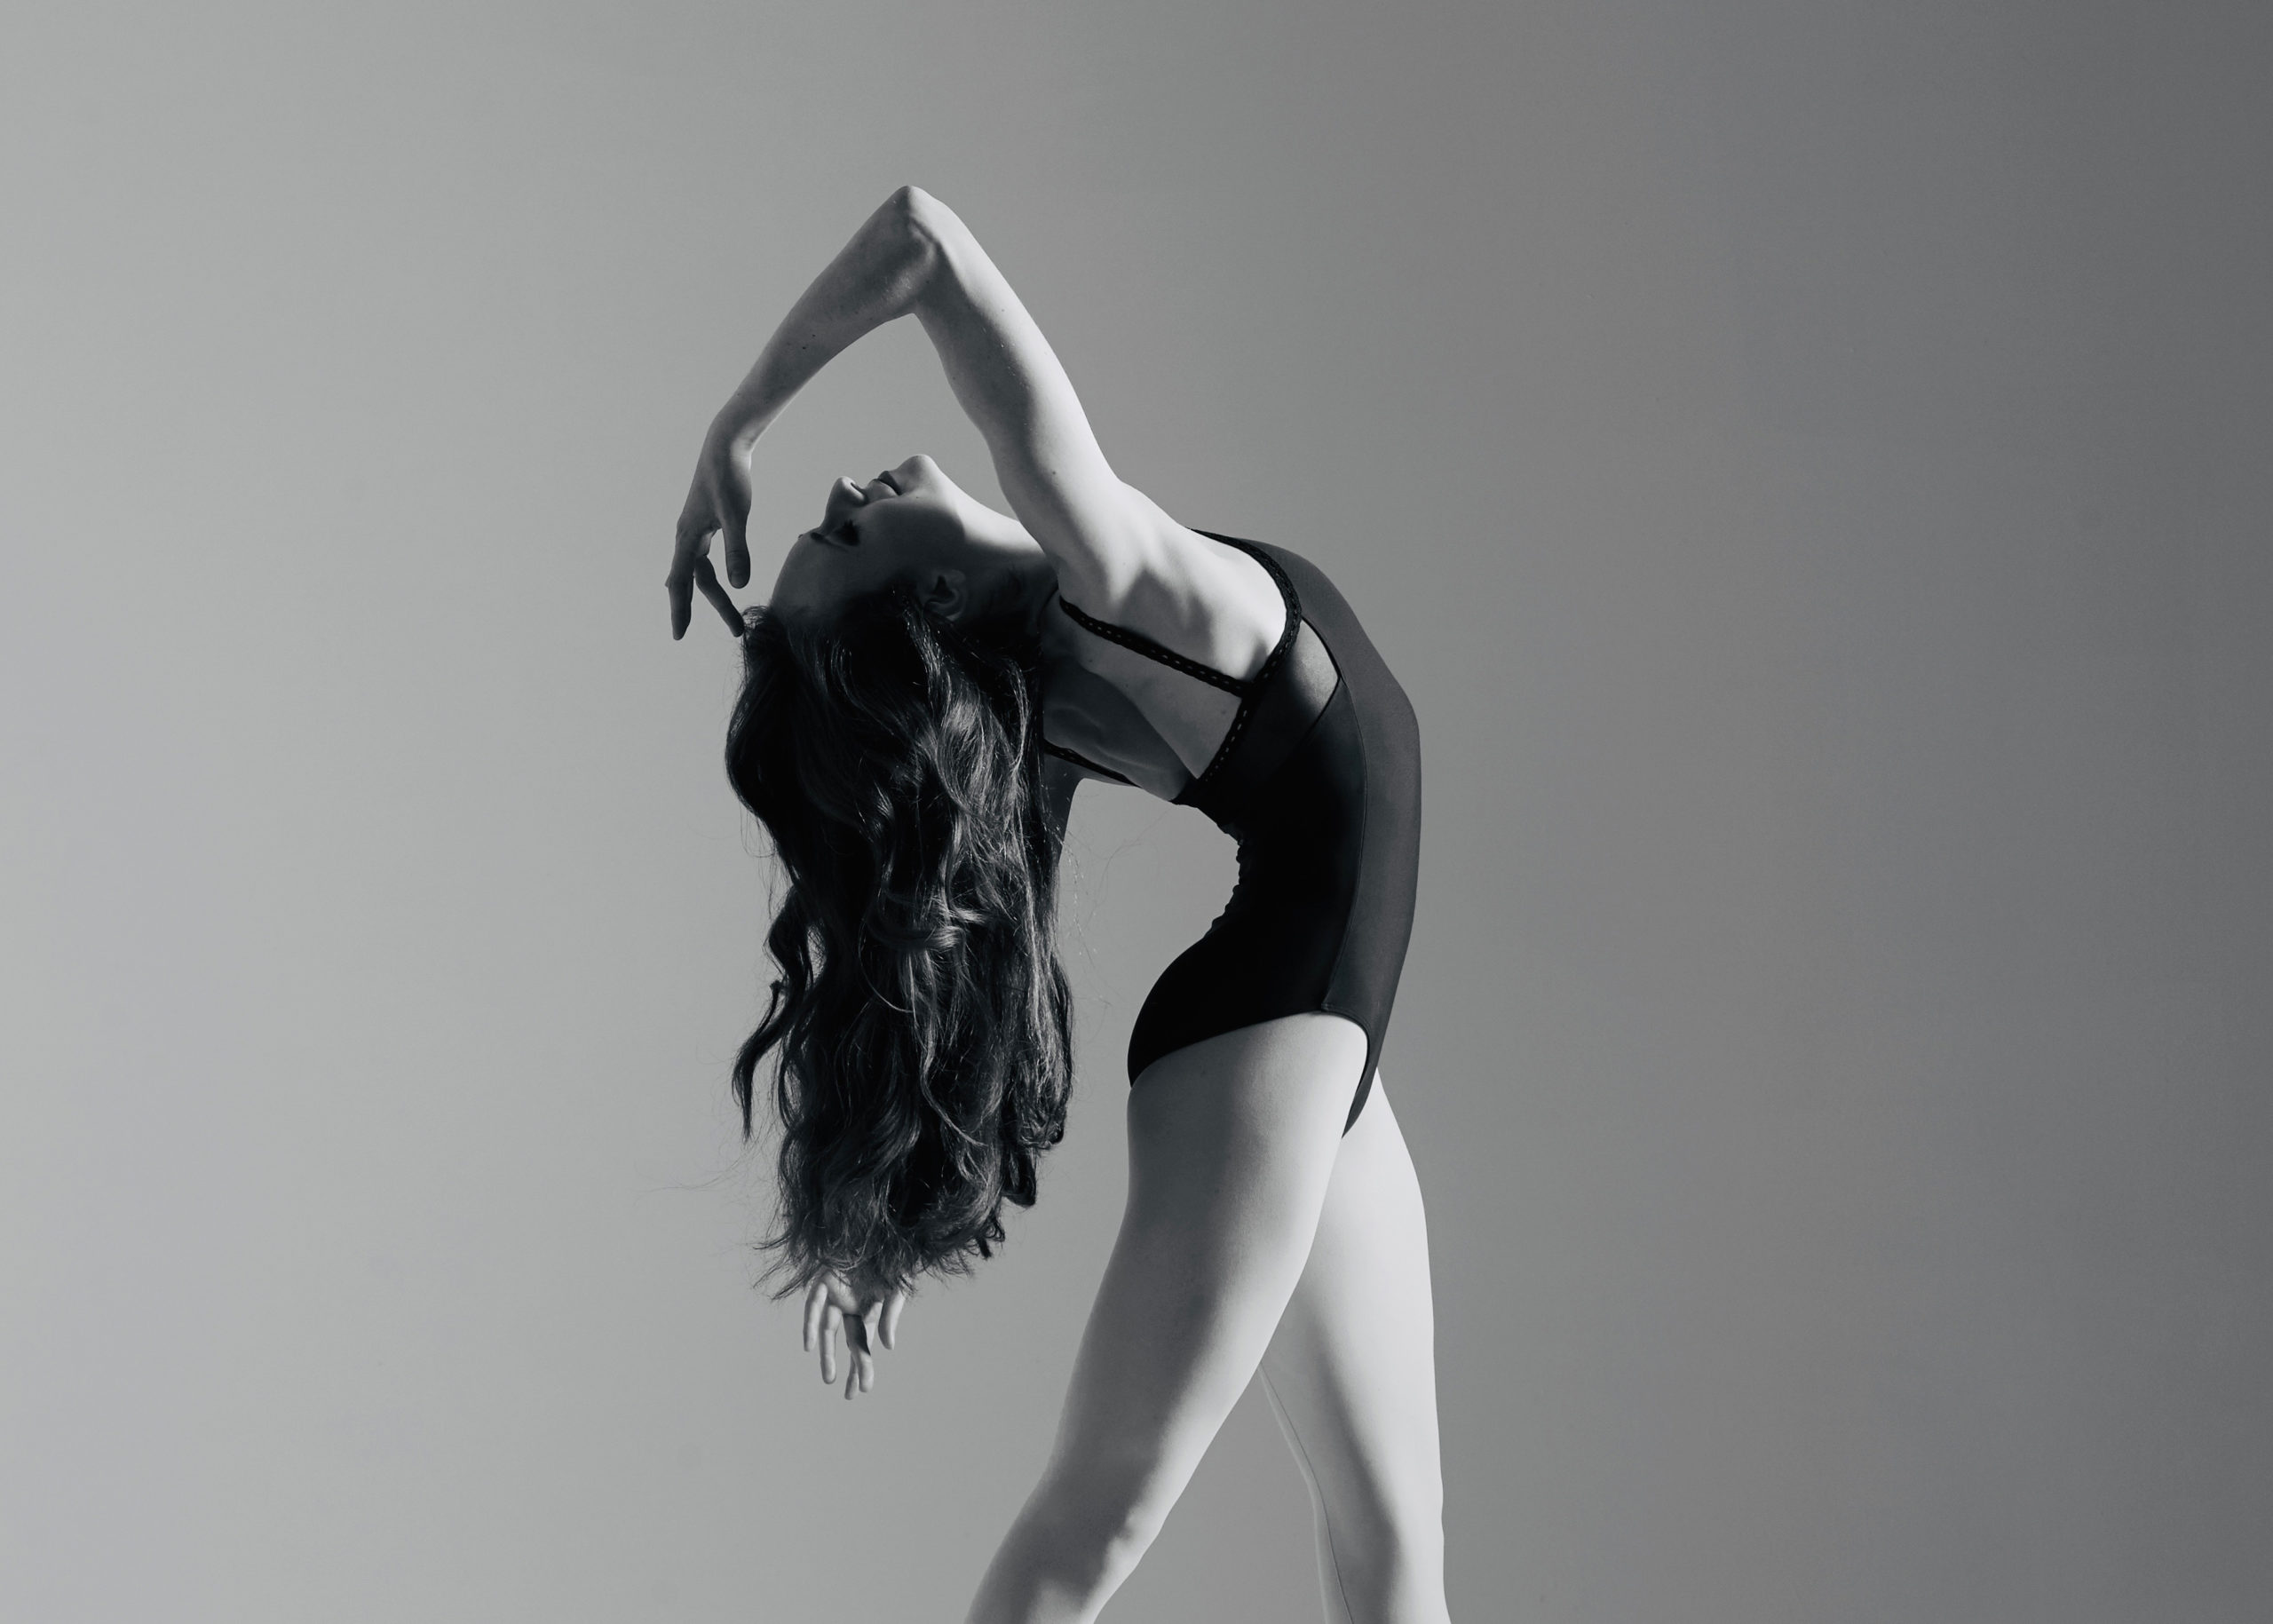 In this black and white ballet photo, Alexandra Martin stands in fourth position and arches her head back, her long hair flowing behind her. She wears a dark leotard and reaches her right hand back towards her forehead, her eyes closed.